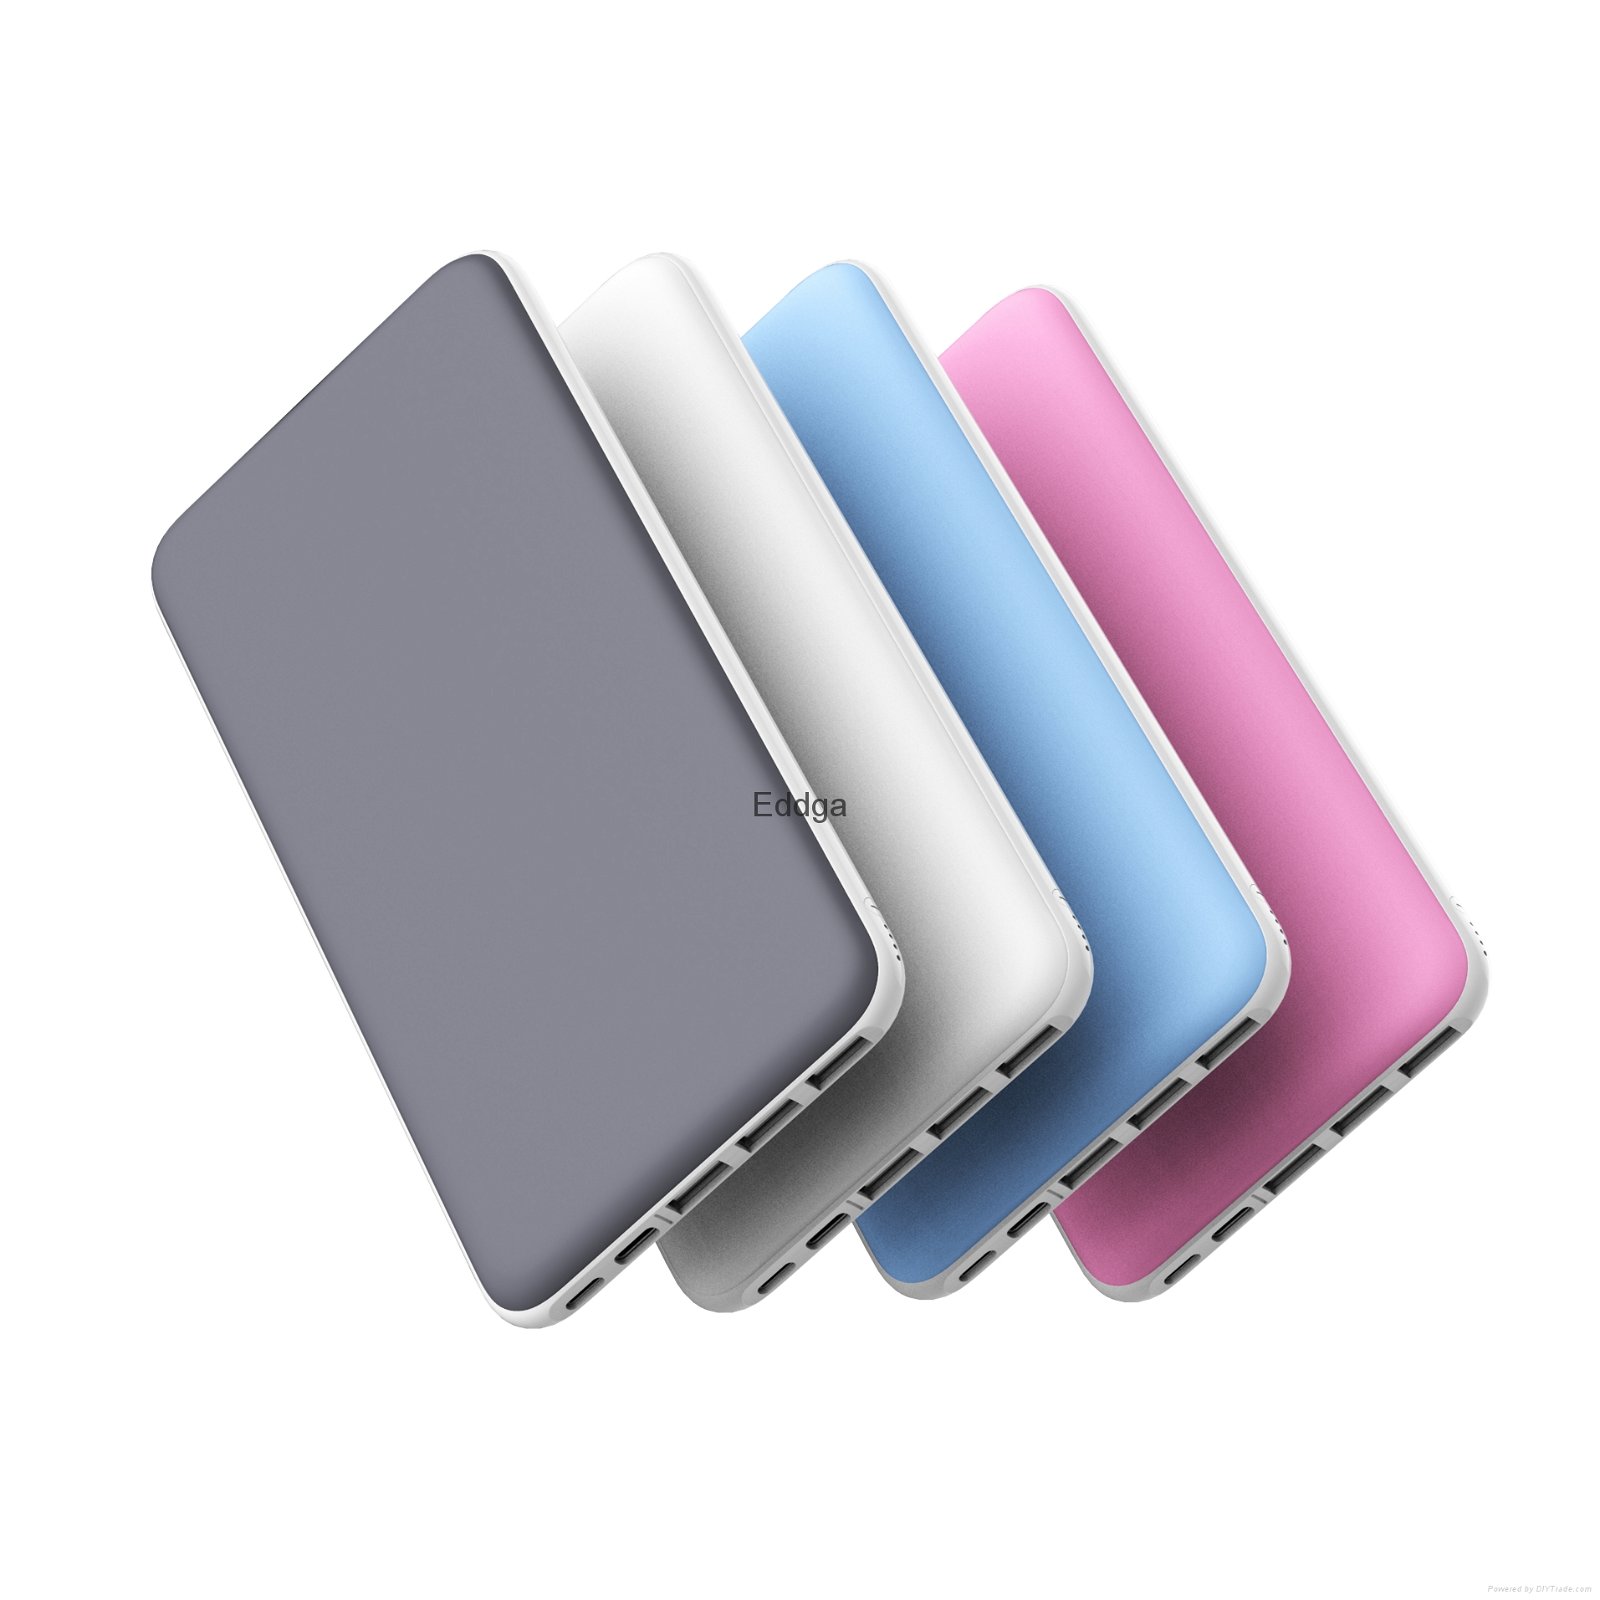 20000mAh 3 IN 1 USB Portable Battery Quick Charge QC 2.0 External Power Banks